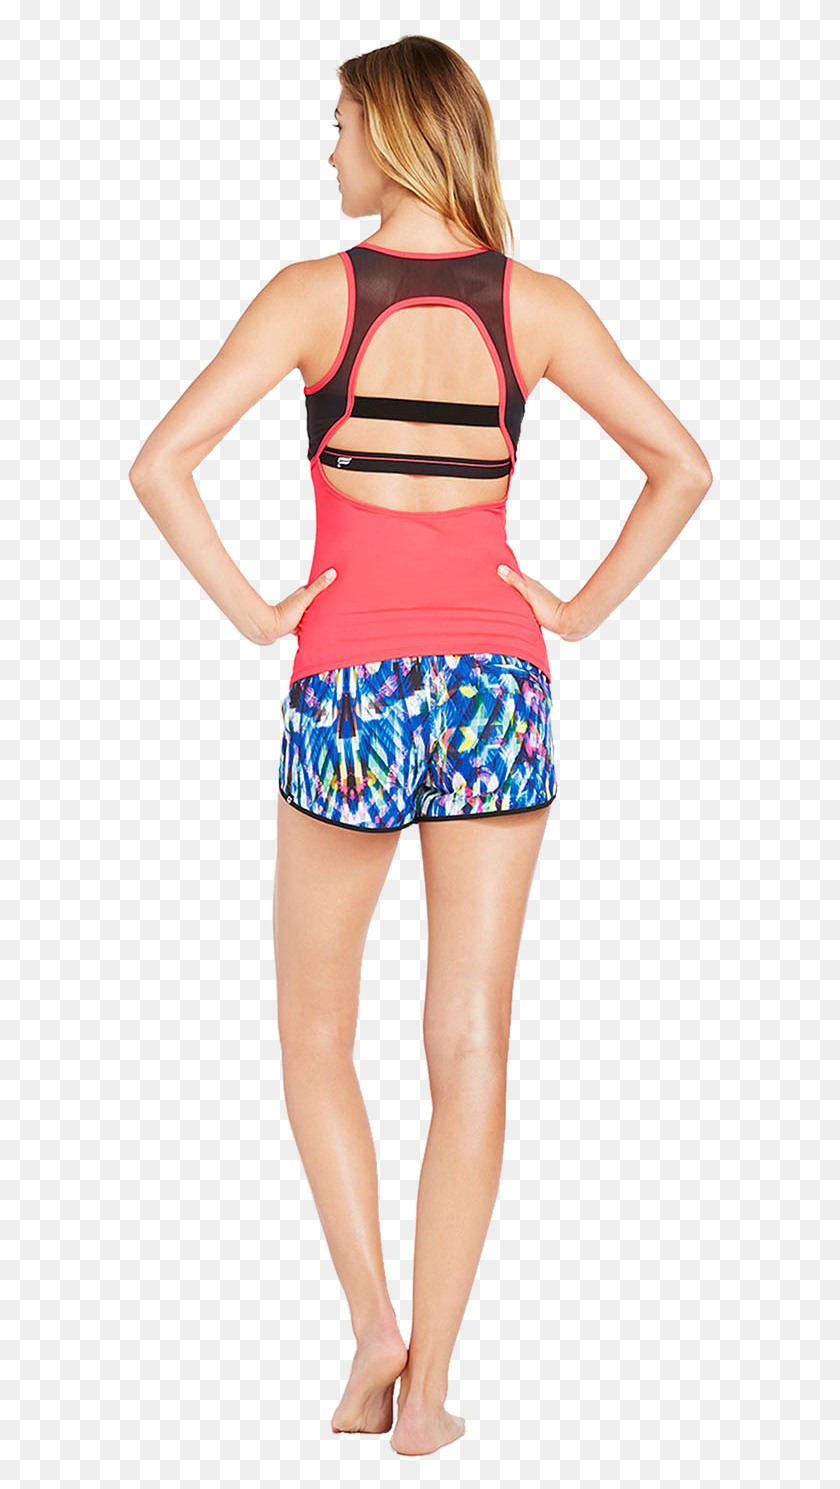 591x1429 Кейт Хадсон Fabletic39S Wave Runner Workout Outfit Фотосессия, Одежда, Одежда, Шорты Hd Png Download